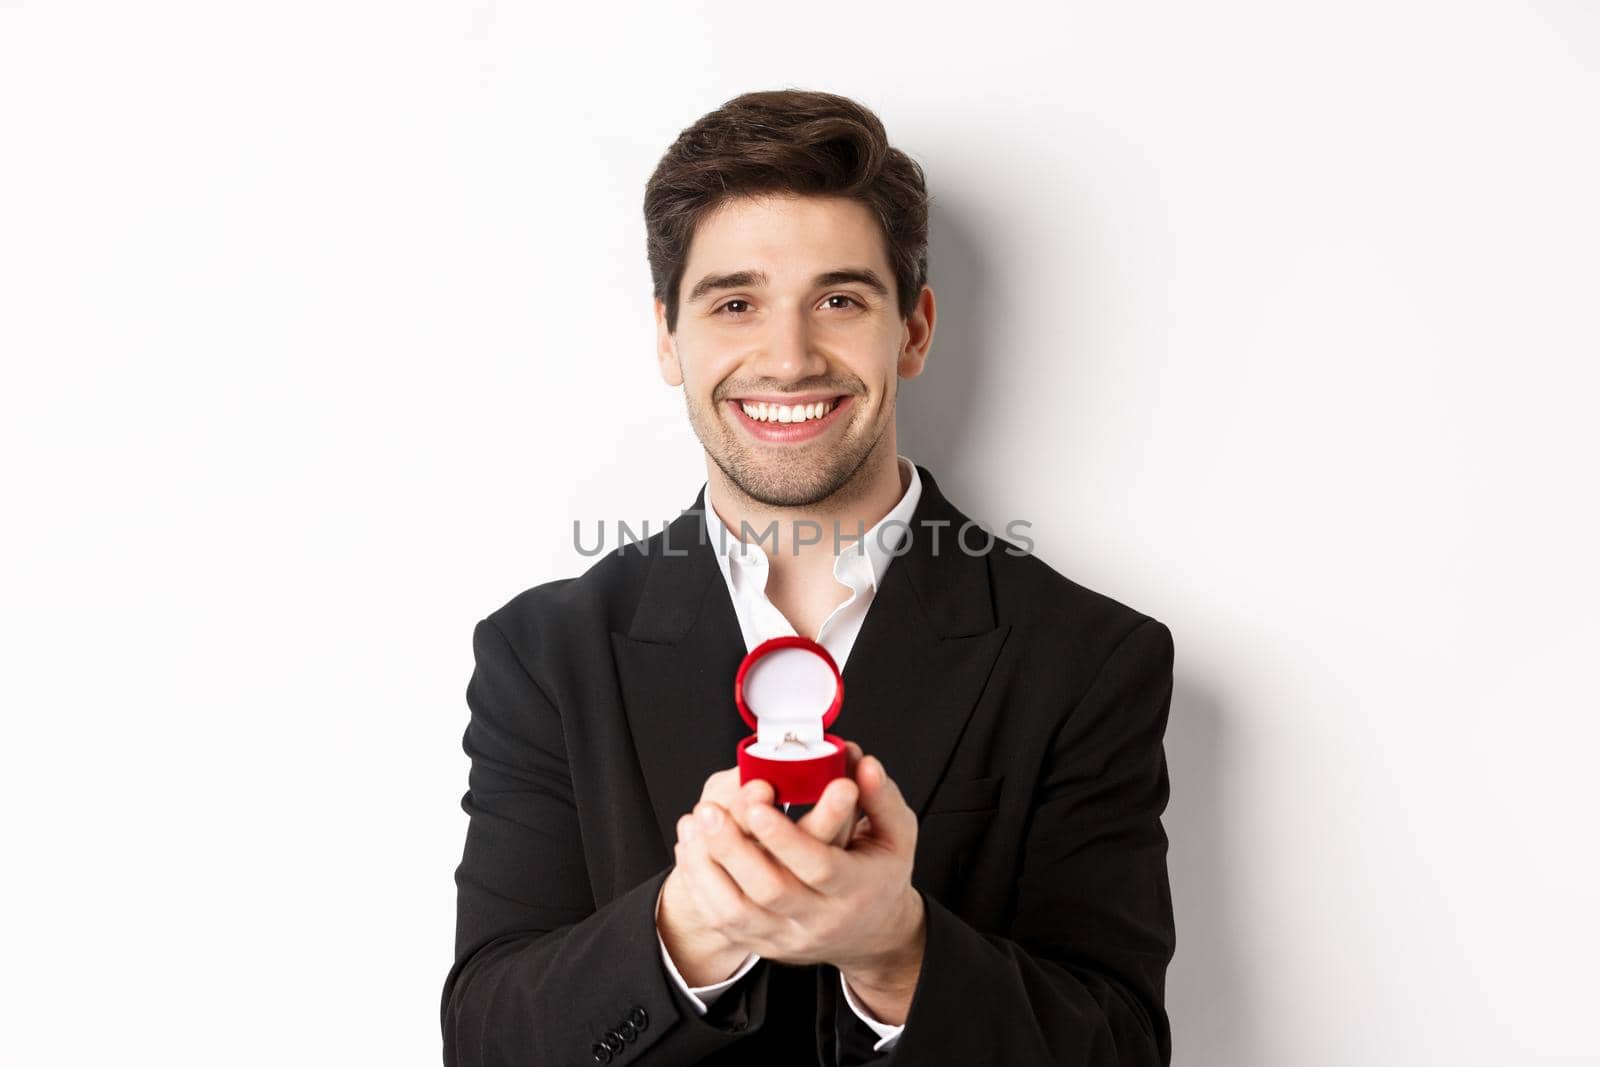 Image of handsome man looking romantic, open small box with engagement ring, making a proposal and smiling, standing against white background.